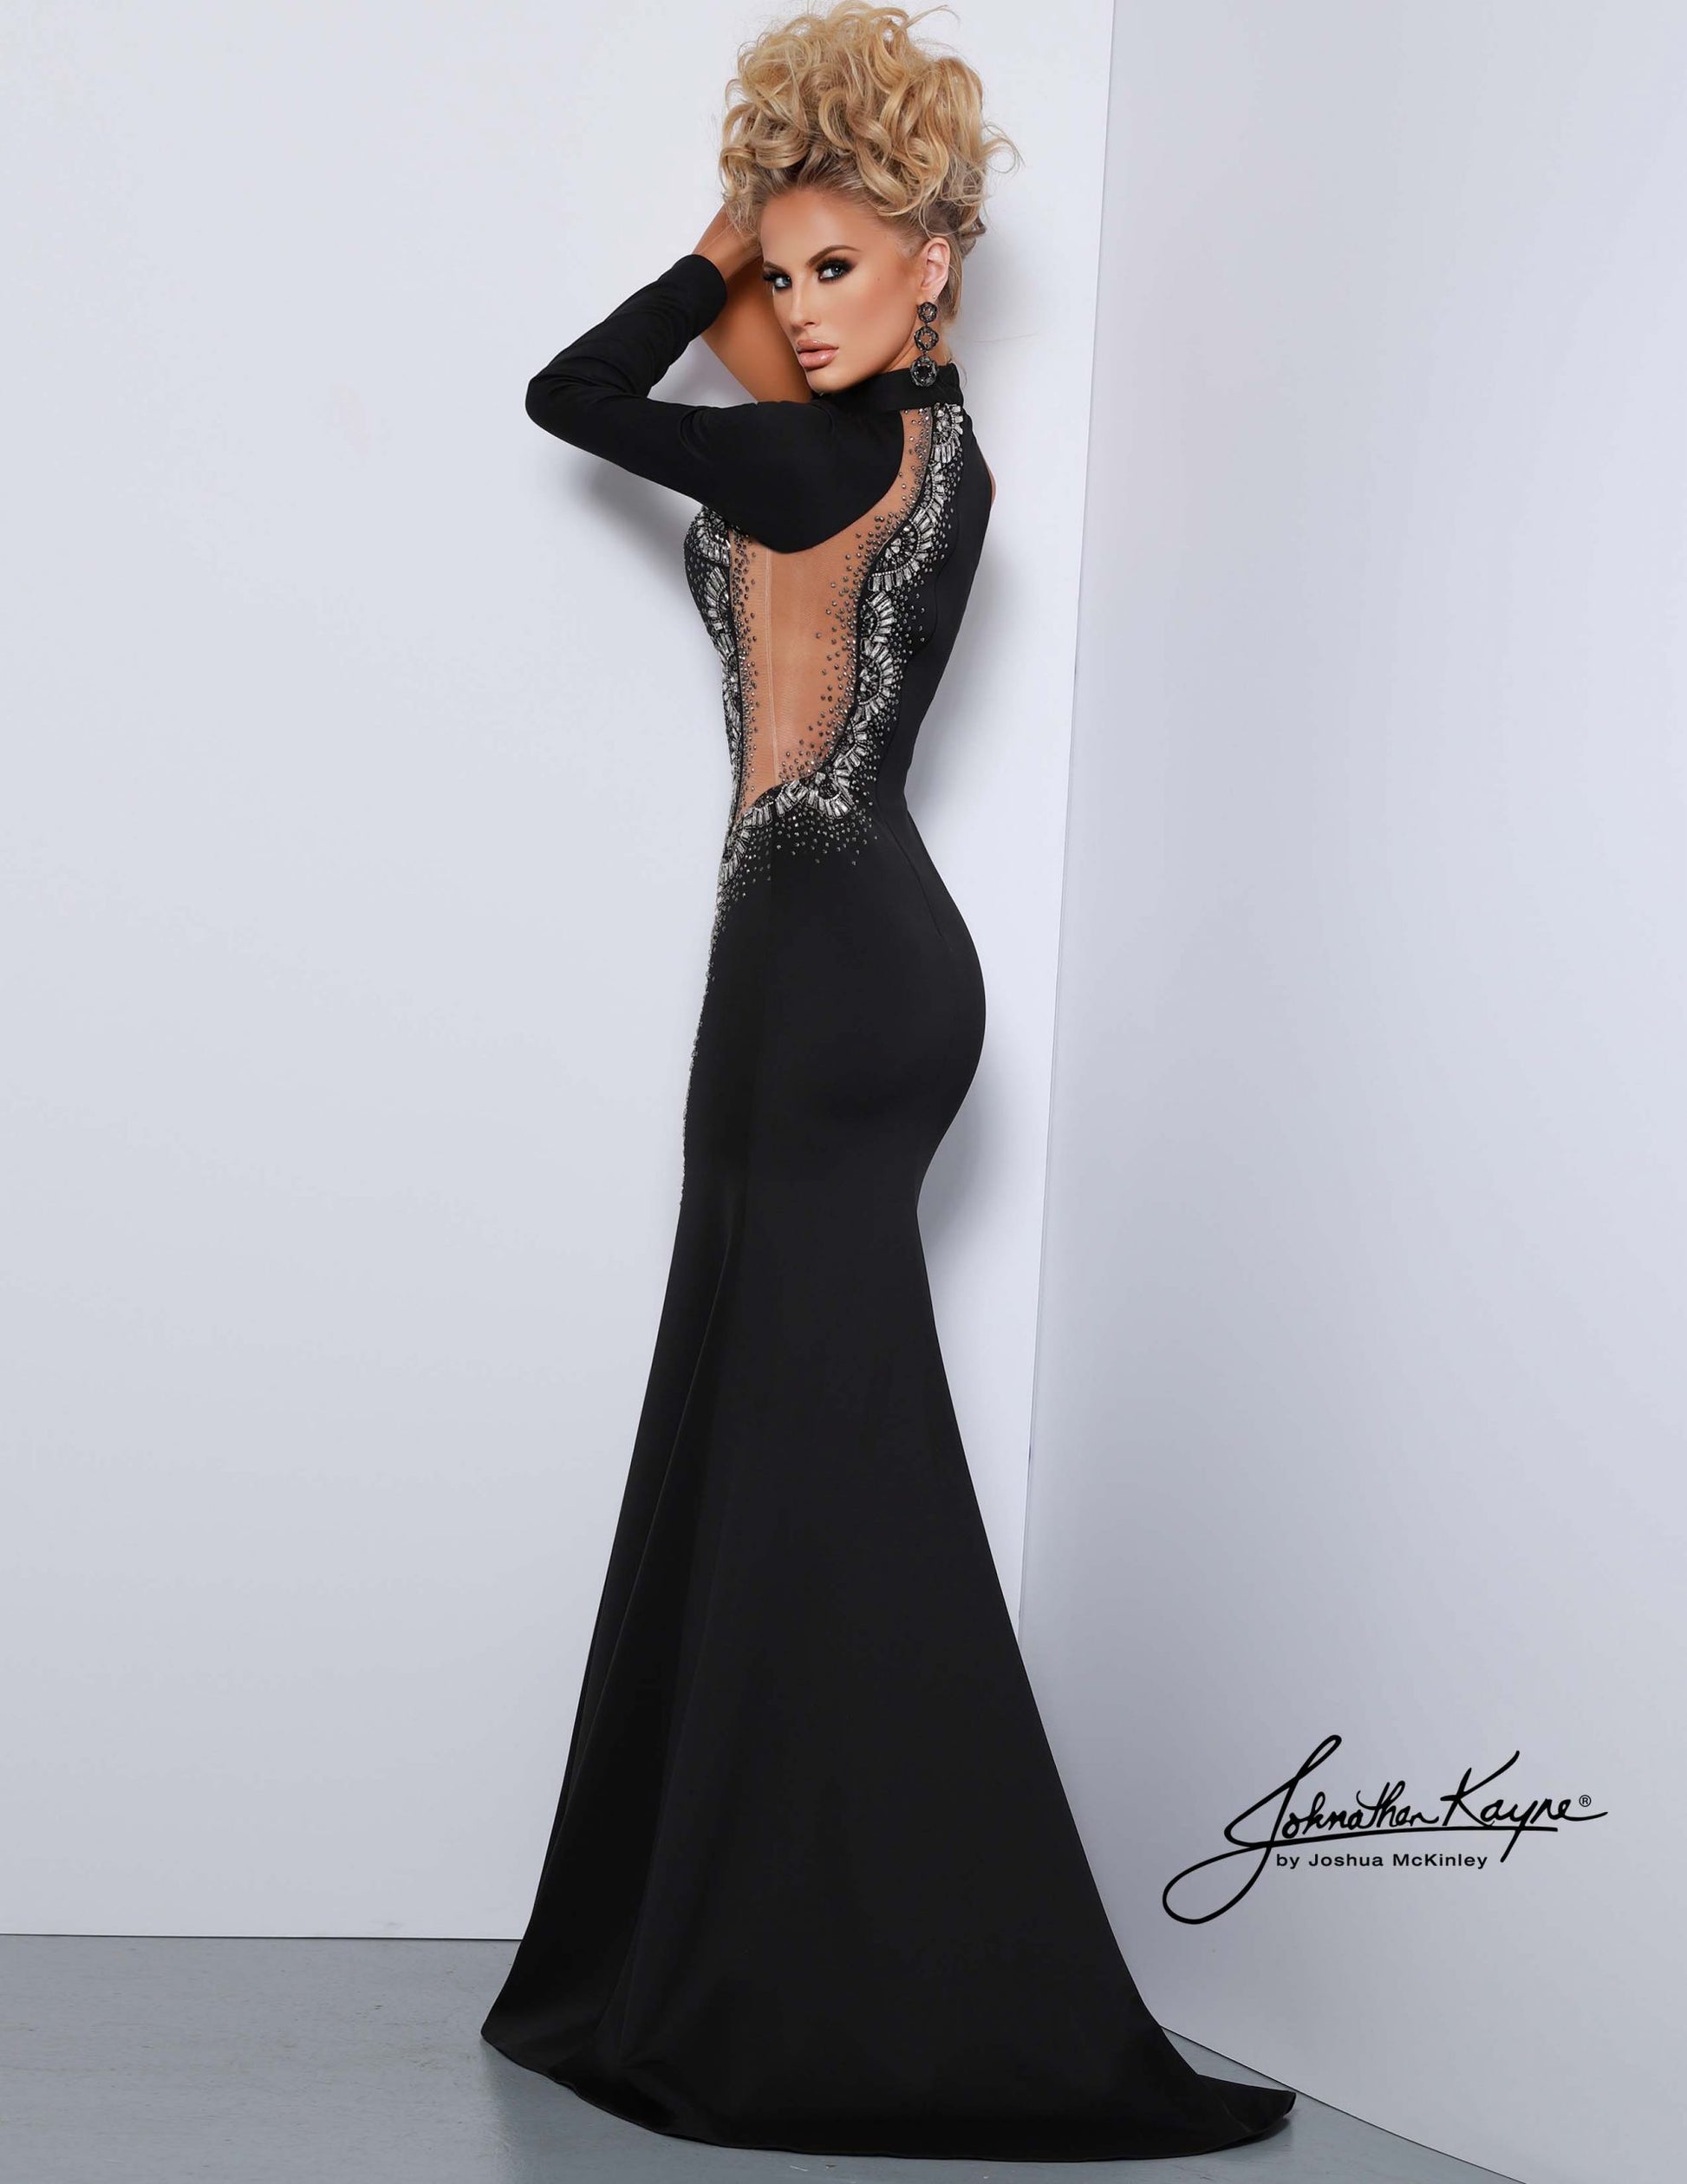 Johnathan Kayne 2421 Size 4 Black Long Sheer One Shoulder Long Sleeve Pageant Dress Formal Gown. This elegant and sophisticated gown is crafted from sheer fabric and features a one-shoulder sleeve in a size 4. This beautiful evening dress is ideal for a formal event or pageant. With subtle detailing, it is sure to make heads turn.